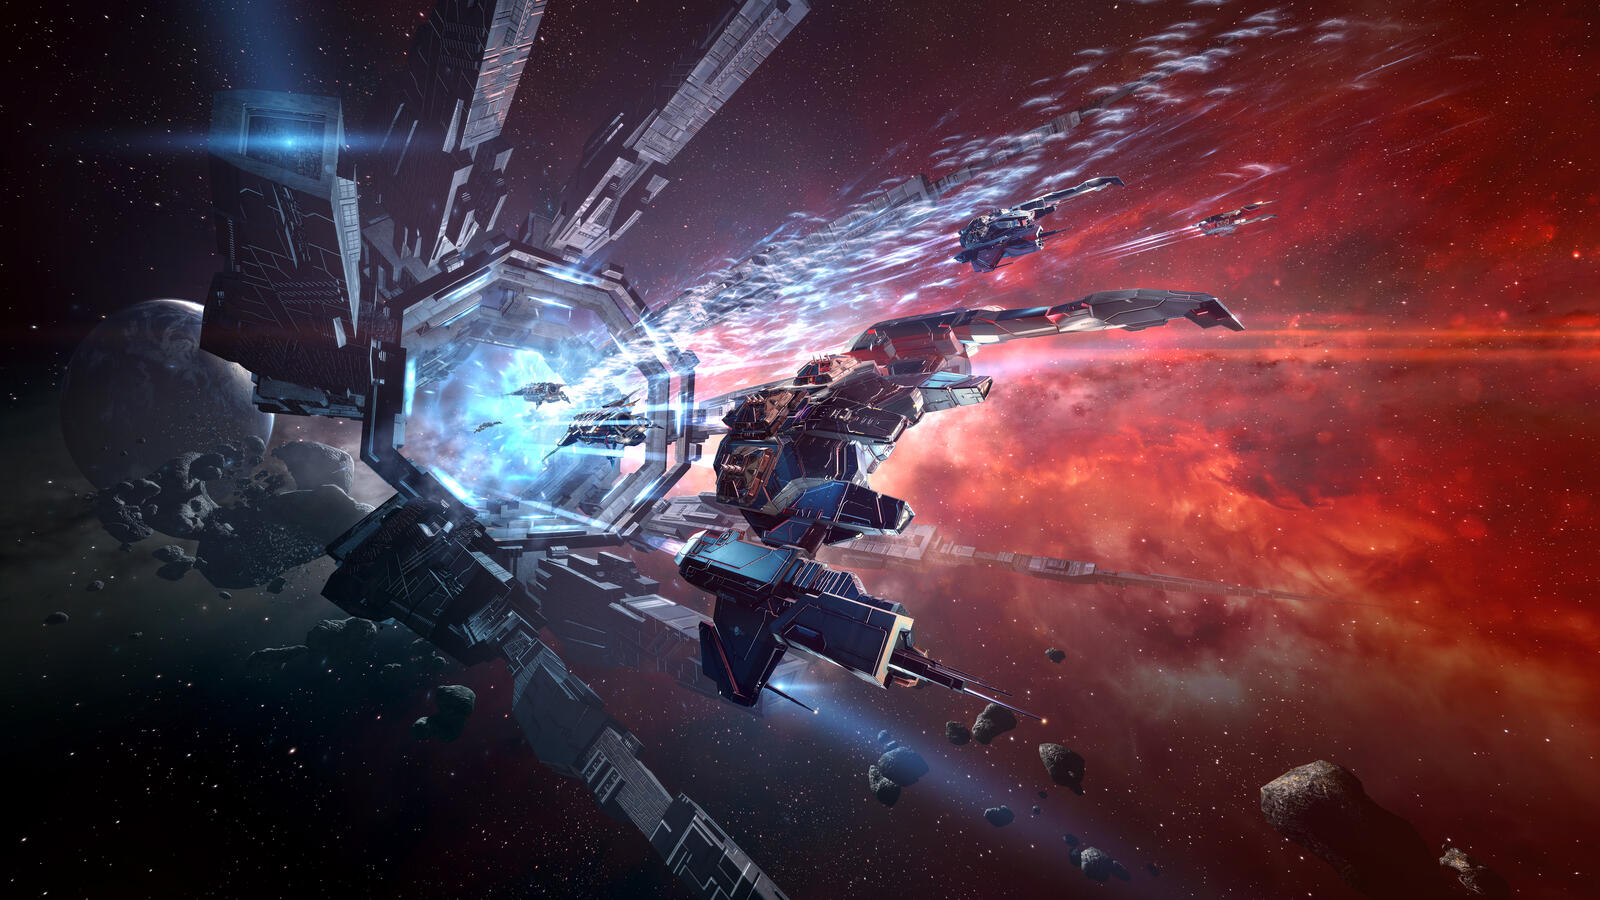 Free photo Spaceships from the game EVE online